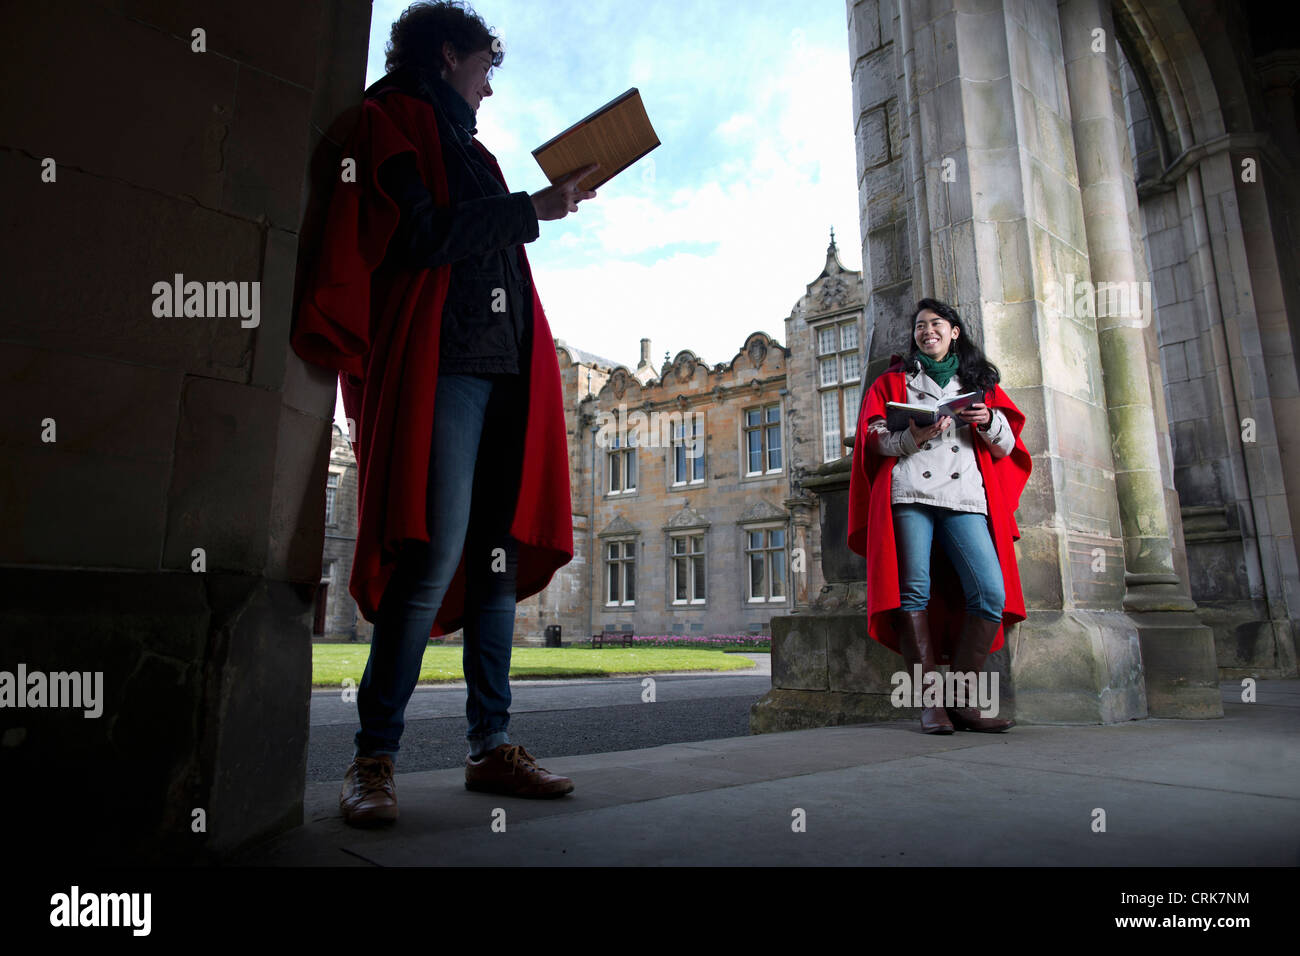 University students in traditional capes Stock Photo